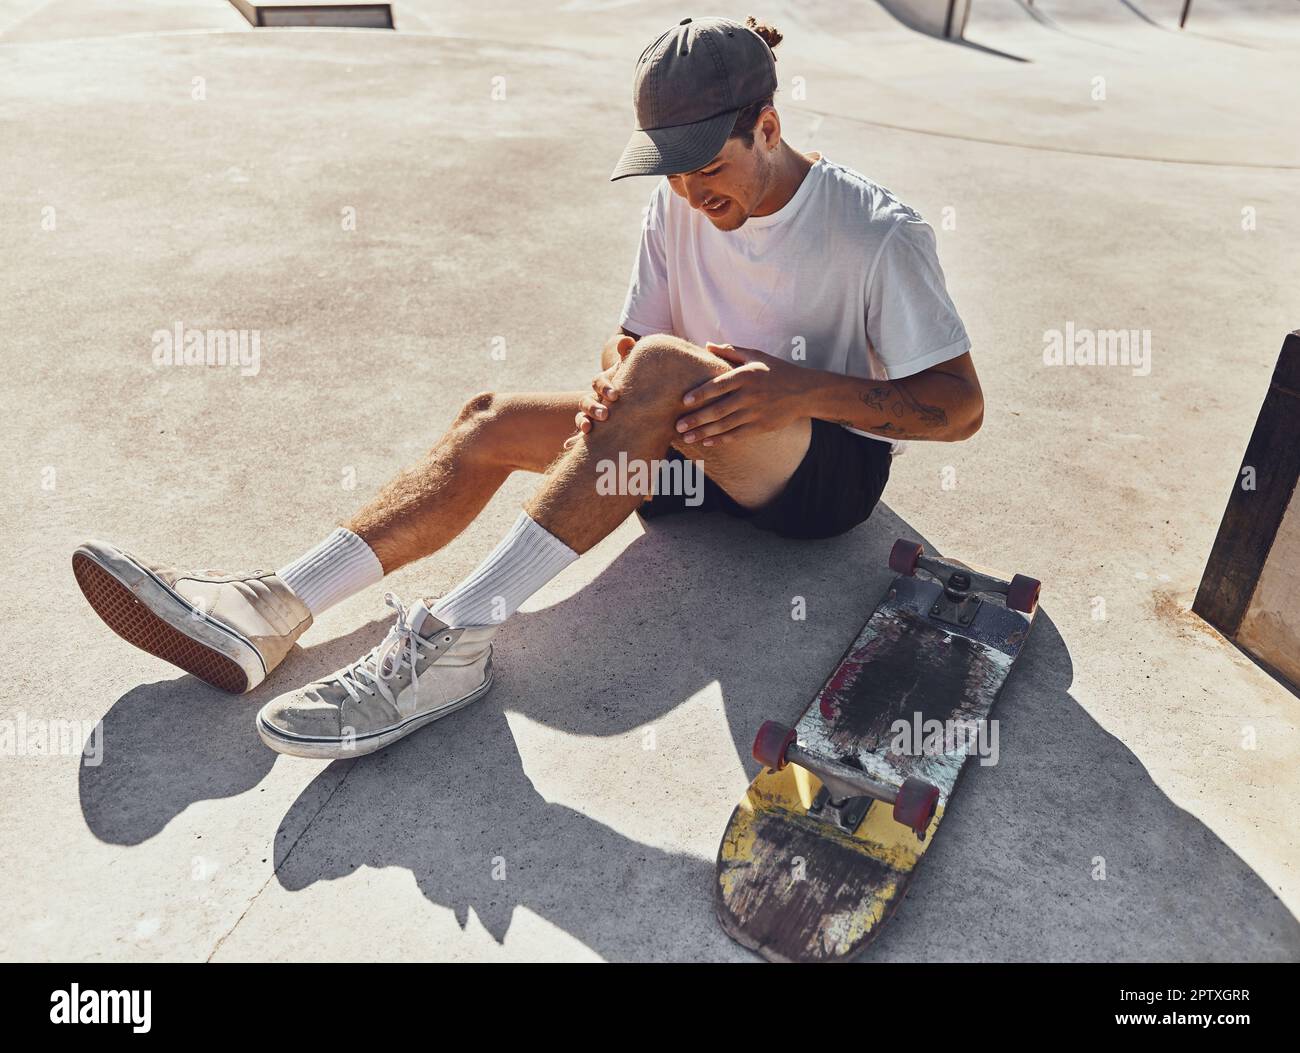 Skateboard, knee and injury with a sports man holding his leg joint in pain  after a fall or accident outdoor. Fitness, skatepark and exercise with a m  Stock Photo - Alamy